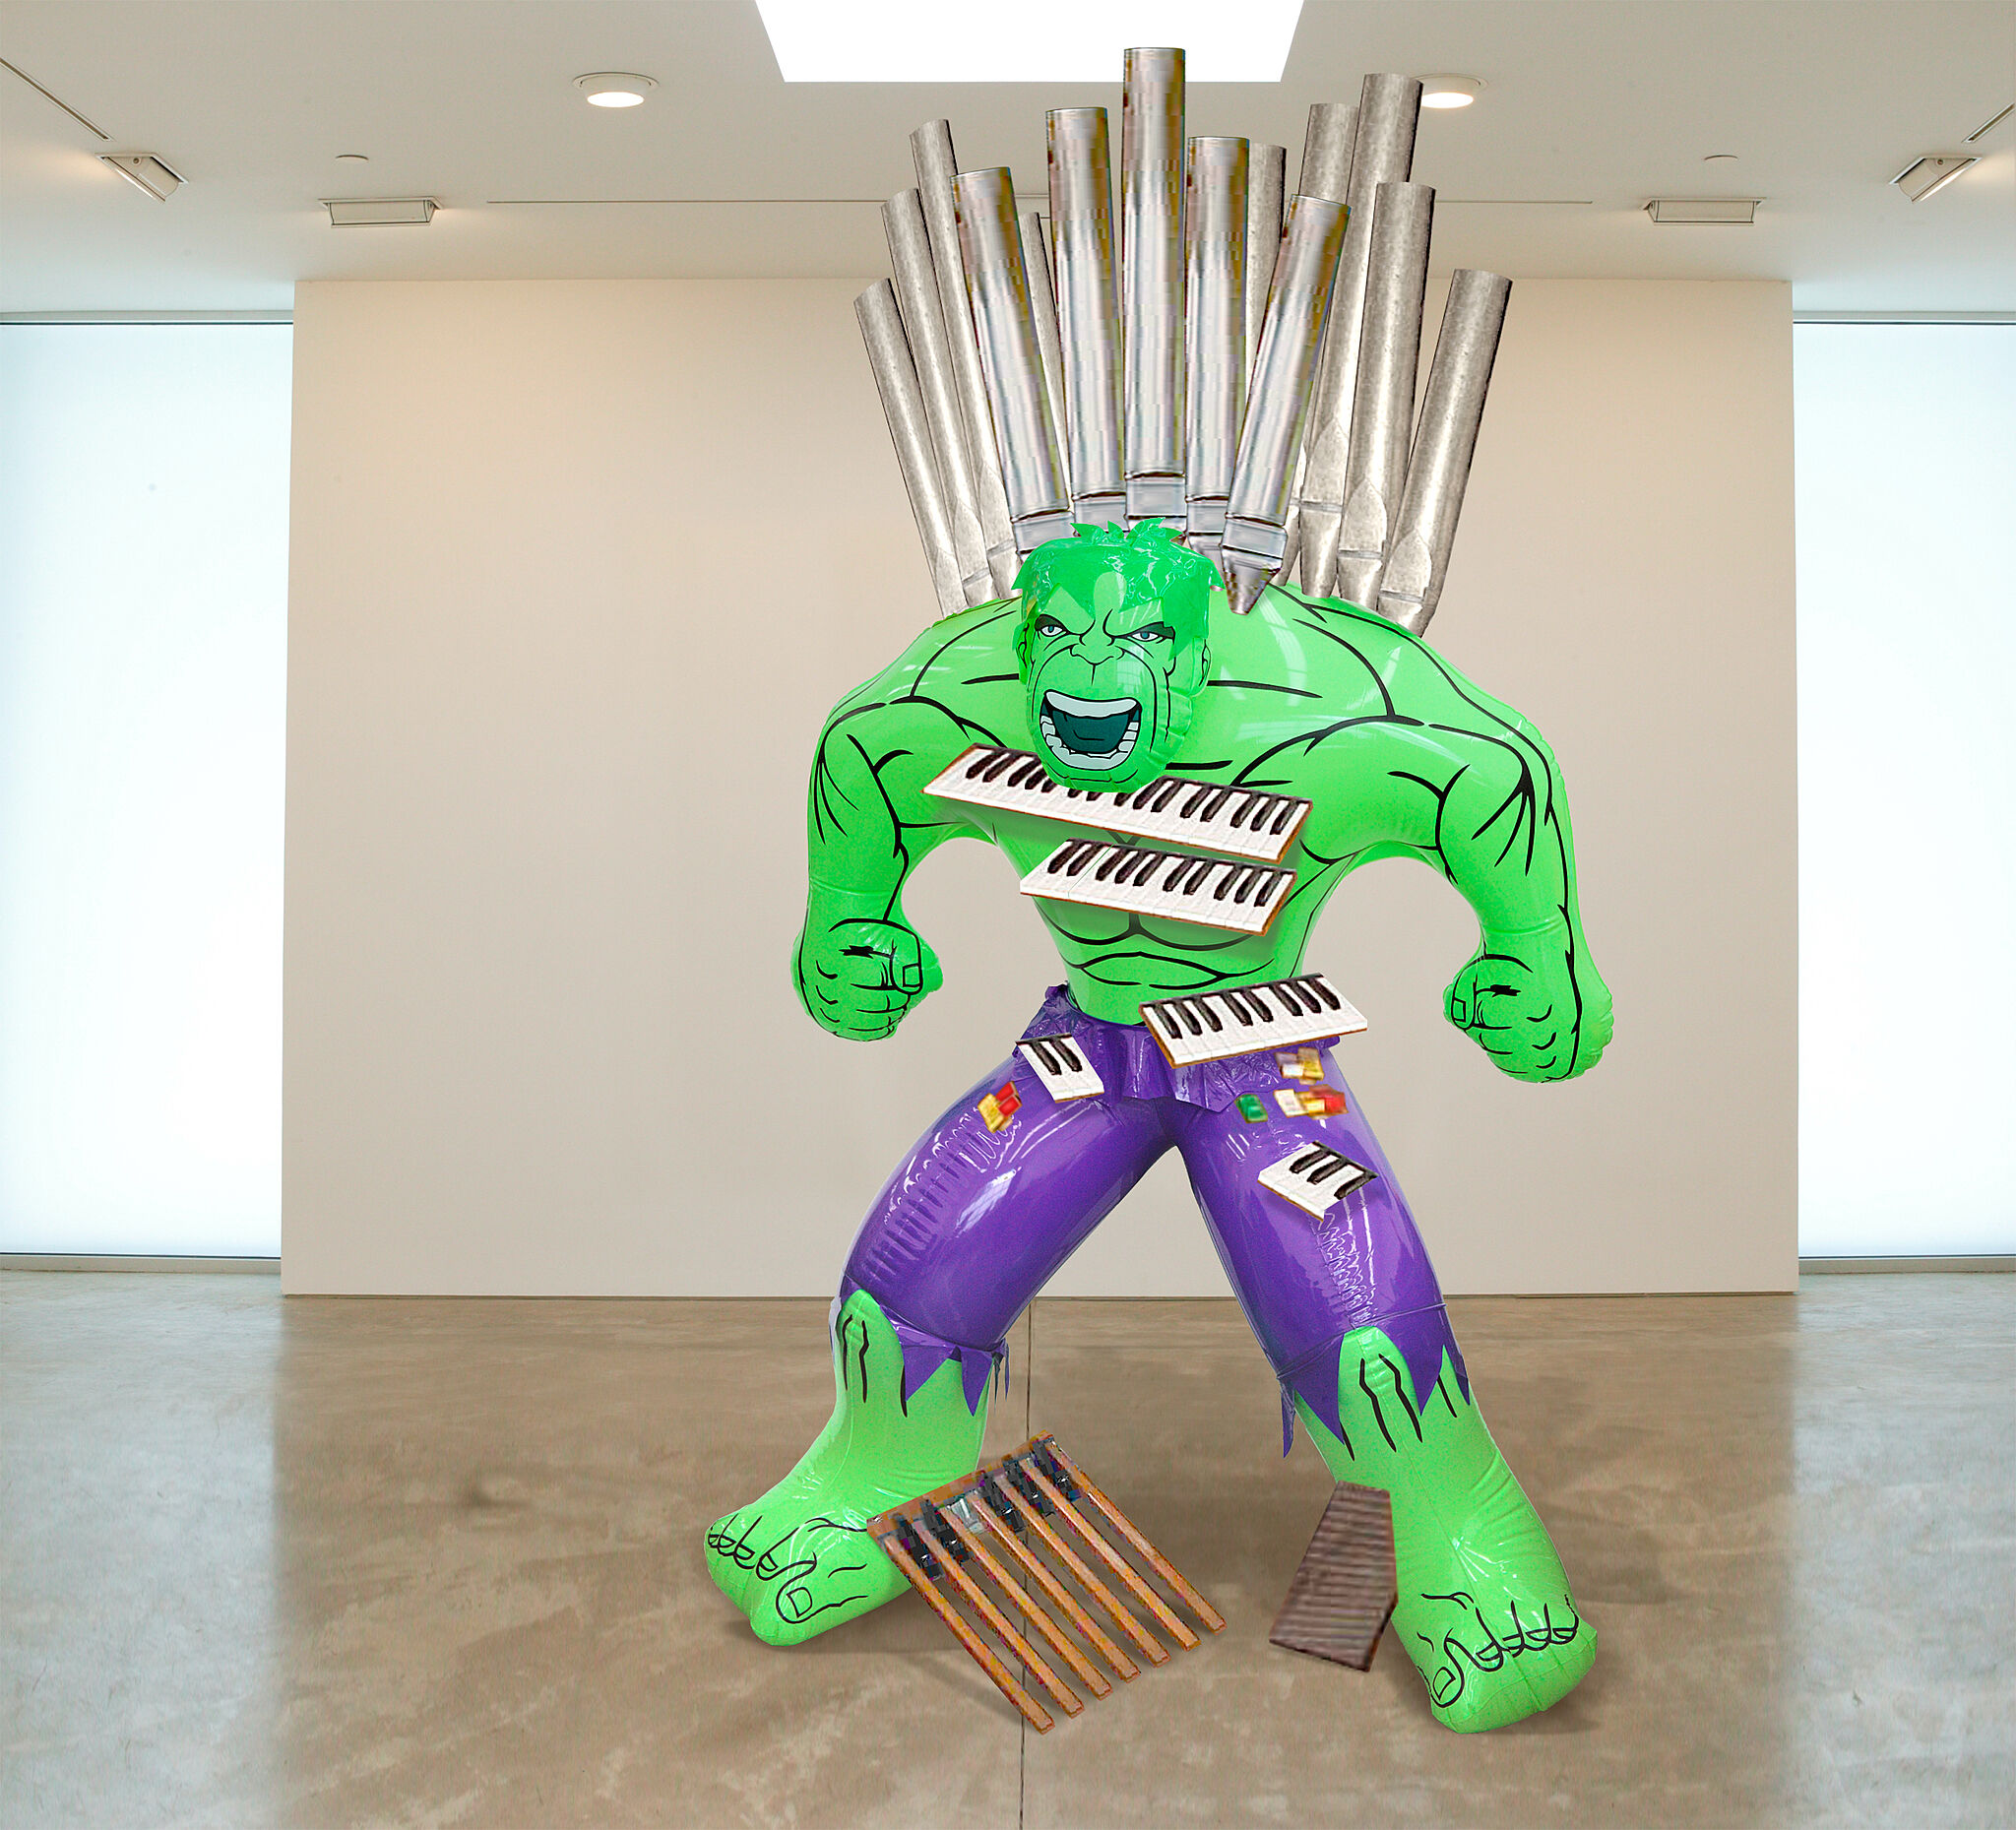 A sculpture of Hulk with organ pipes and keys.